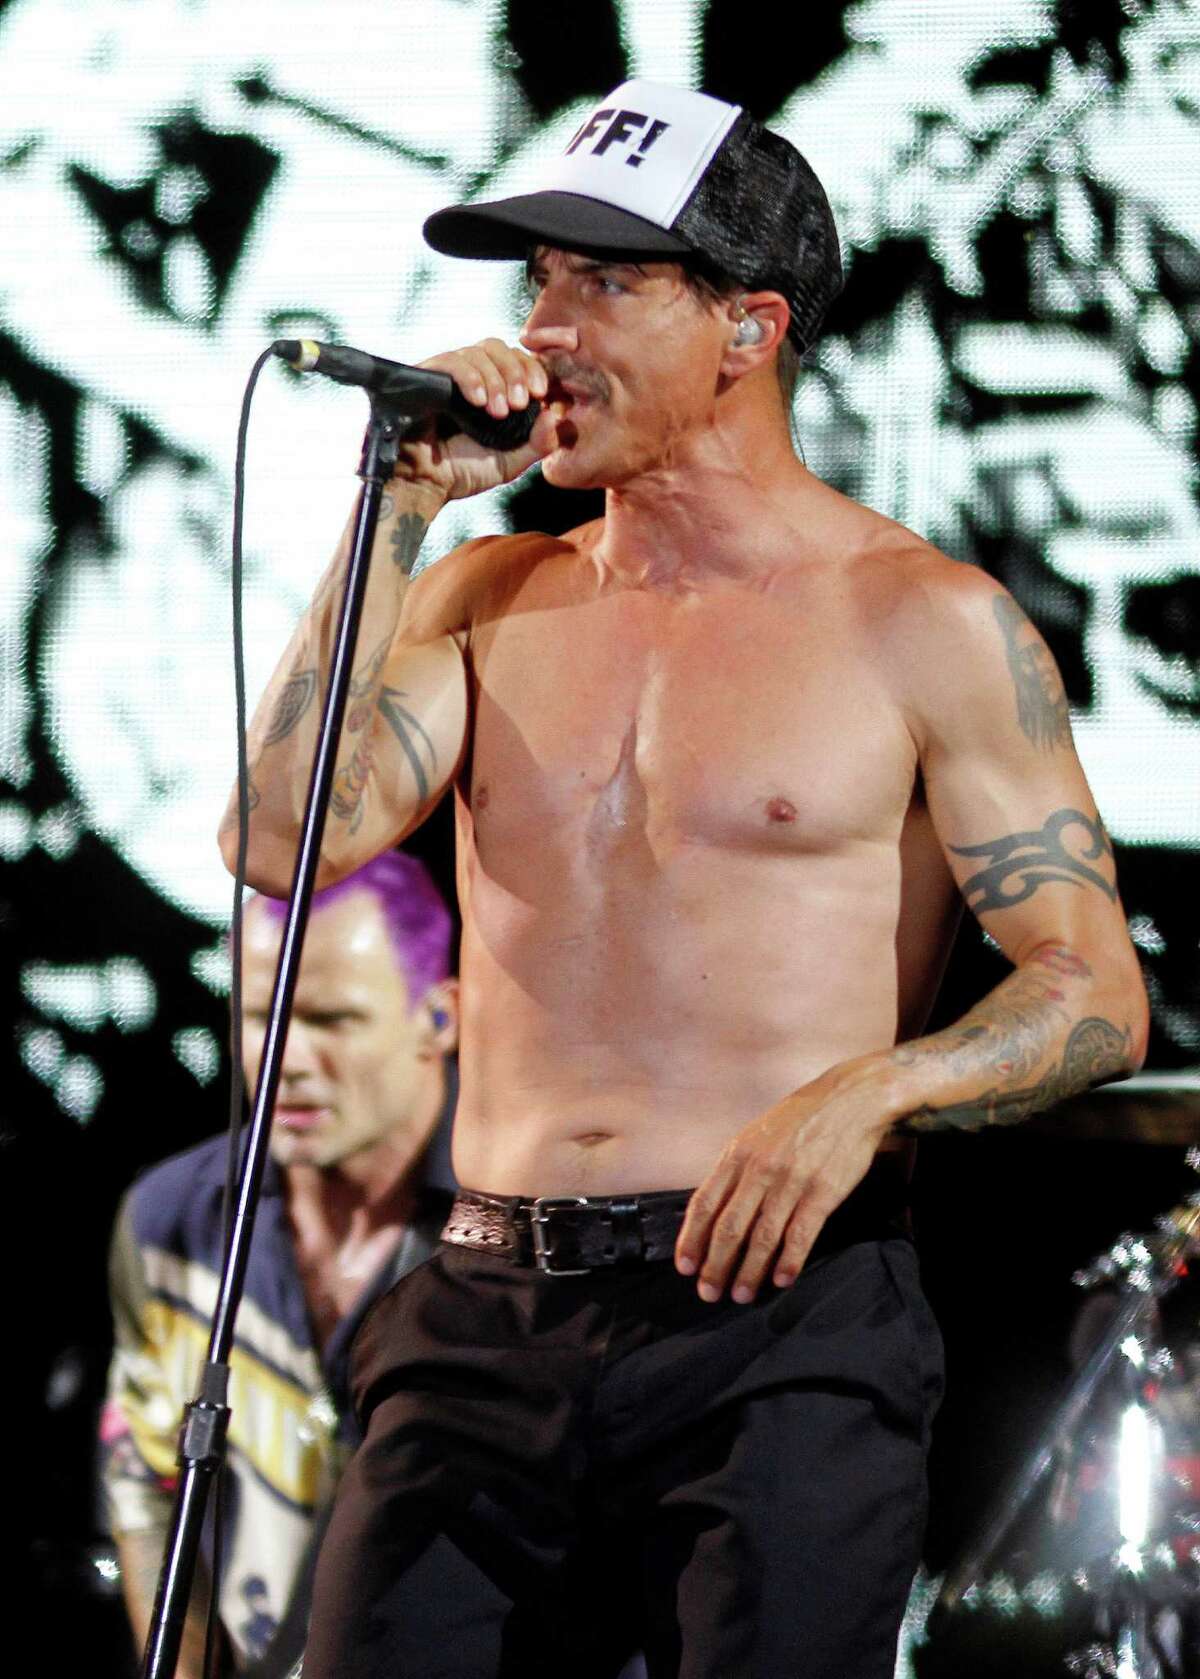 The Red Hot Chili Peppers perform at the Austin City Limits Music Festival, Sunday, Oct. 14, 2012, in Austin, Texas.(Photo by Jack Plunkett/Invision/AP)